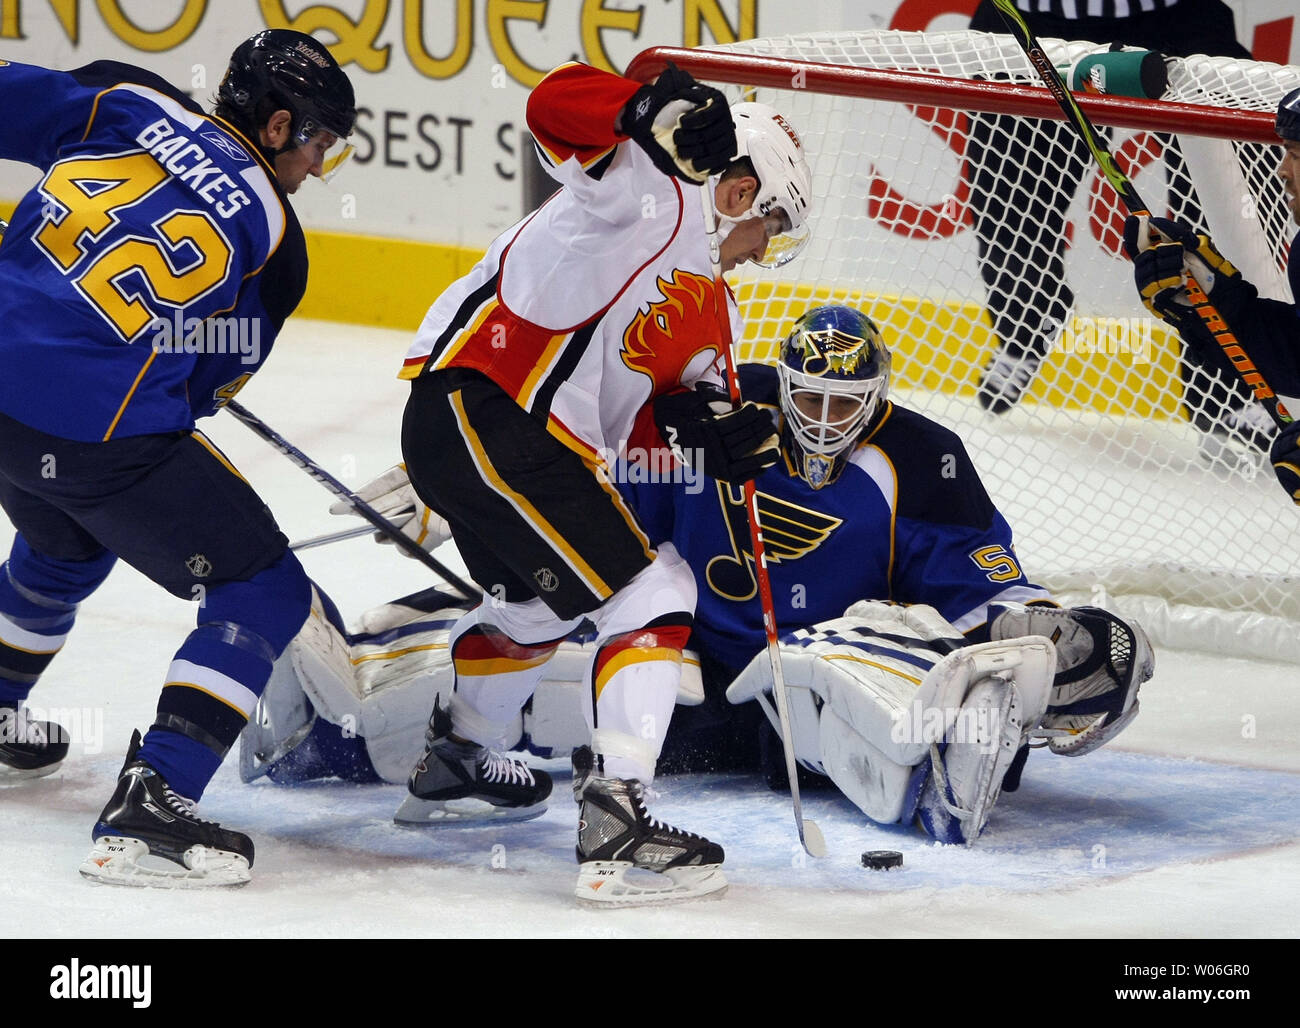 Calgary Flames Michael Cammalleri (13) tries to push the puck by St. Louis Blues goaltender Chris Mason while Blues David Backes (42) tries to clear the zone in the first period at the Scottrade Center in St. Louis on December 16, 2008. Calgary defeated St. Louis 6-3.  (UPI Photo/Bill Greenblatt) Stock Photo